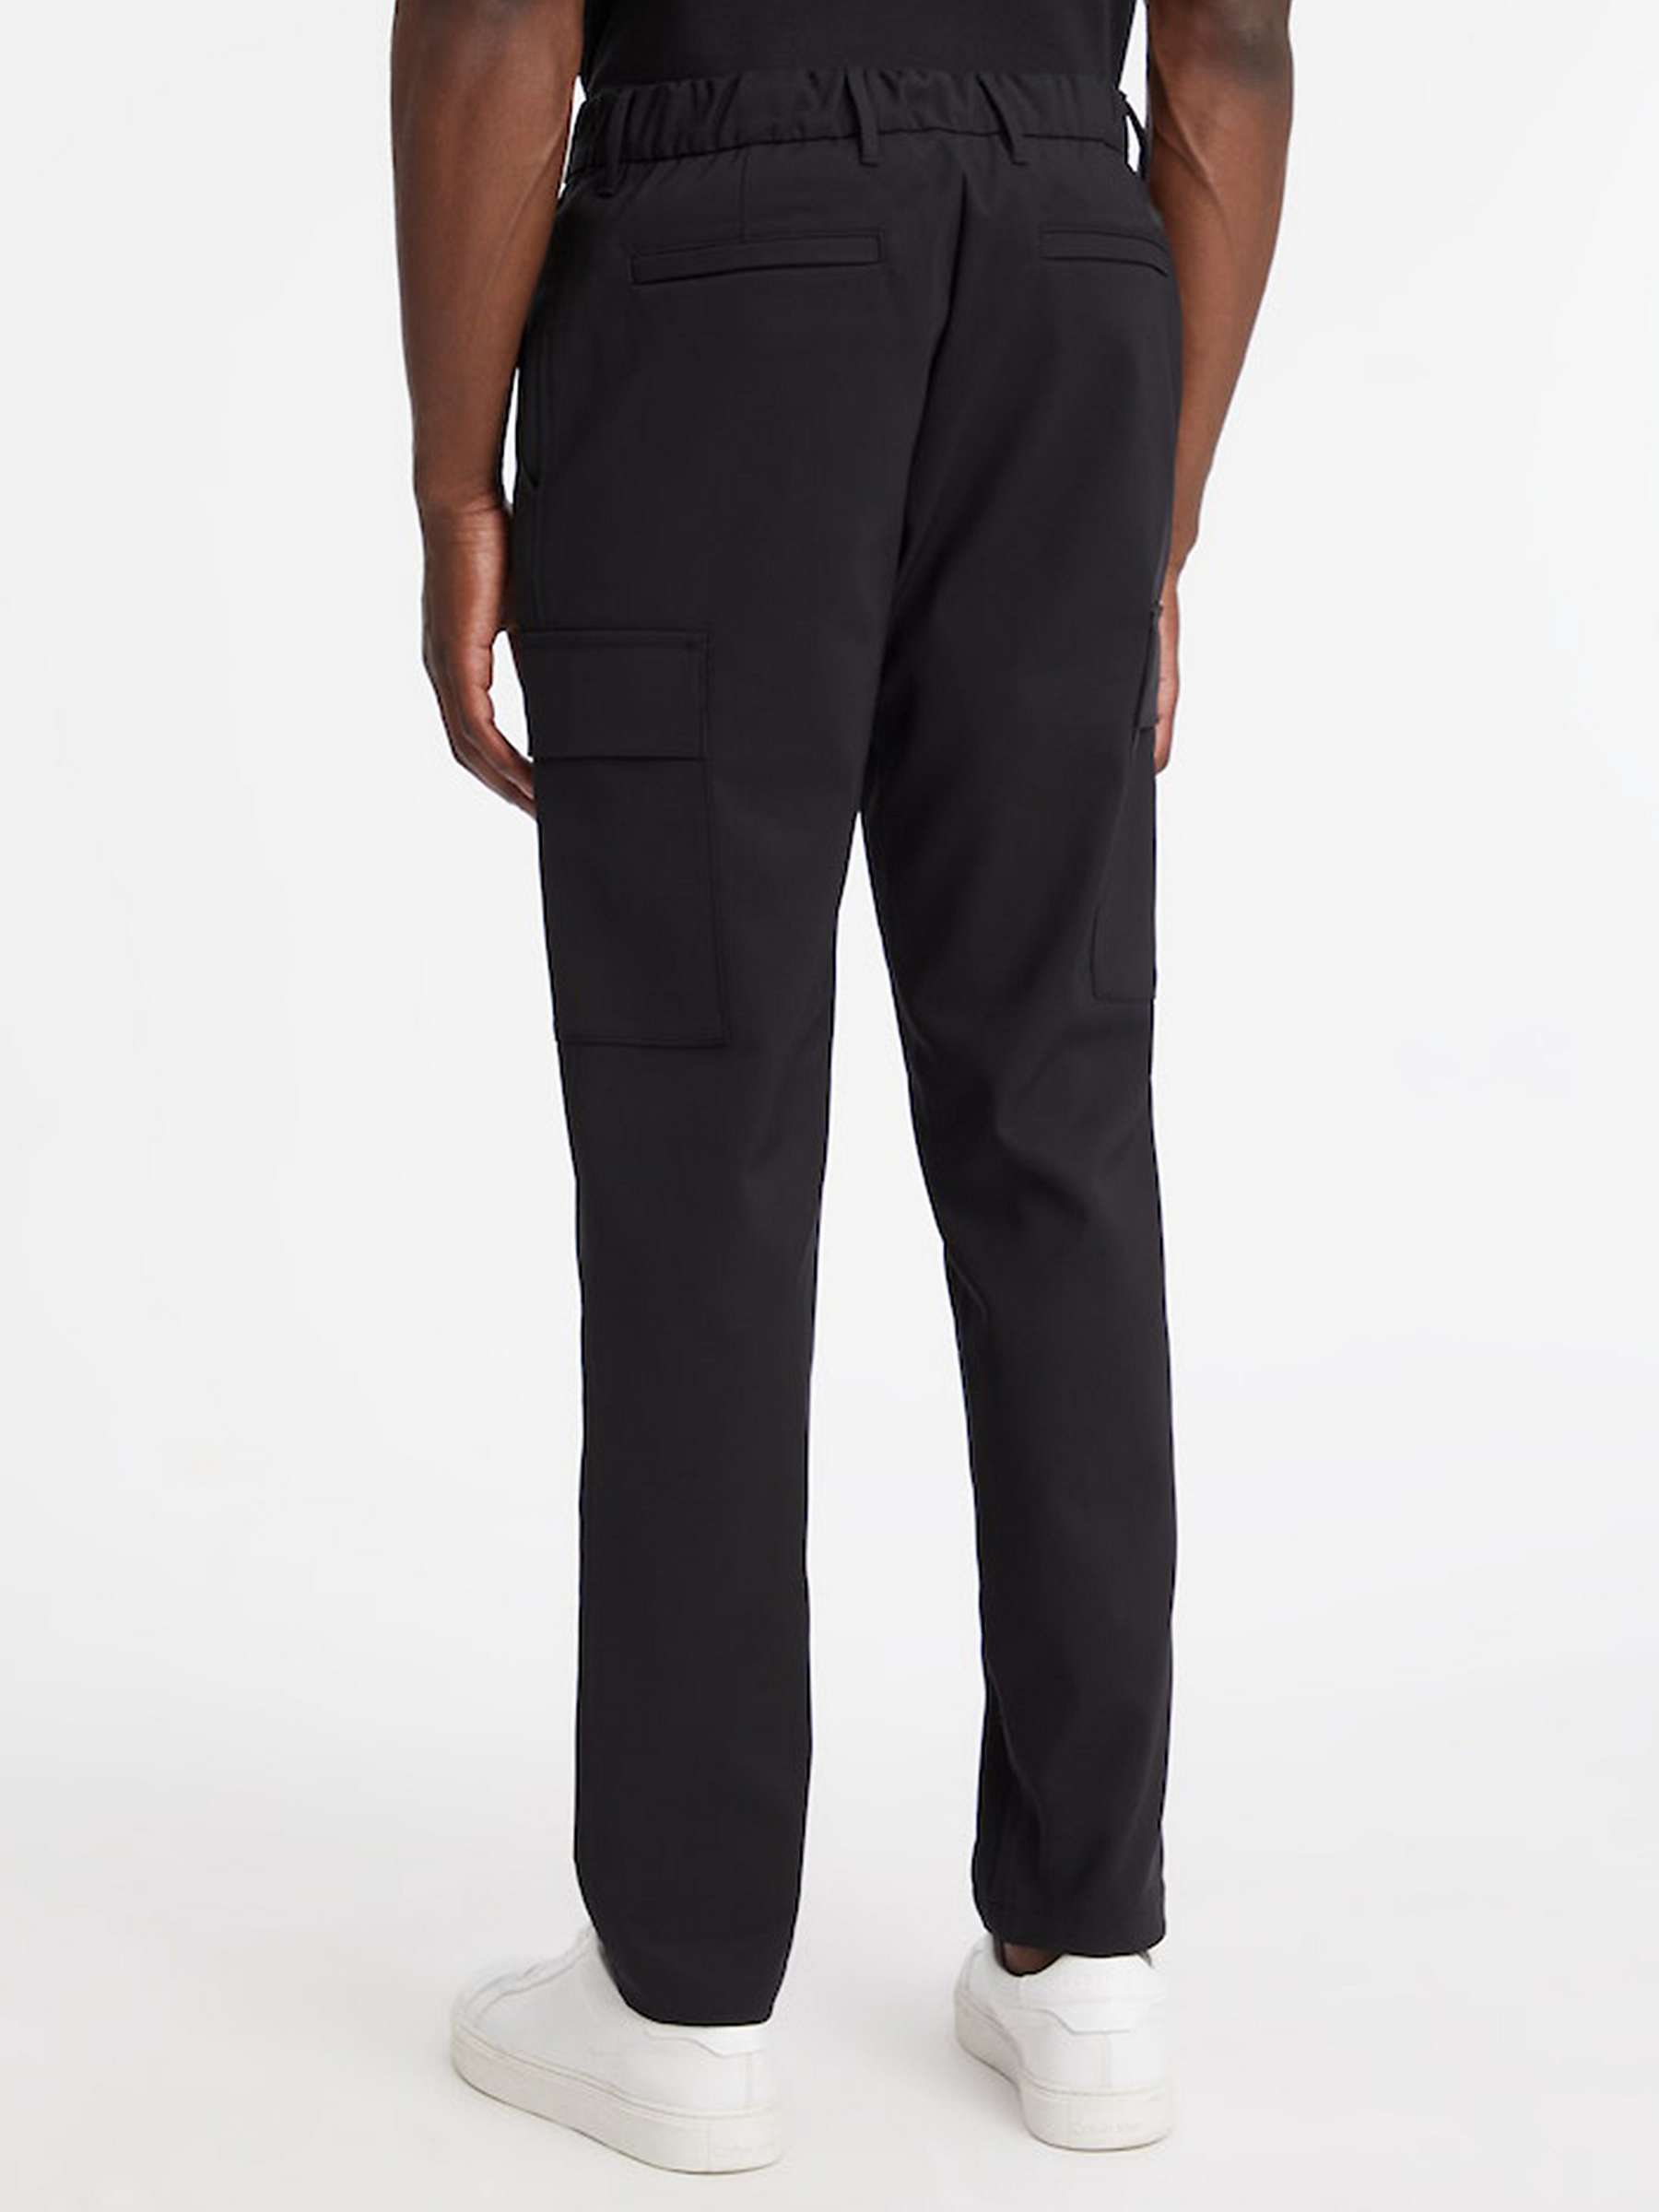 Buy Calvin Klein Tapered Cargo Trousers, CK Black Online at johnlewis.com